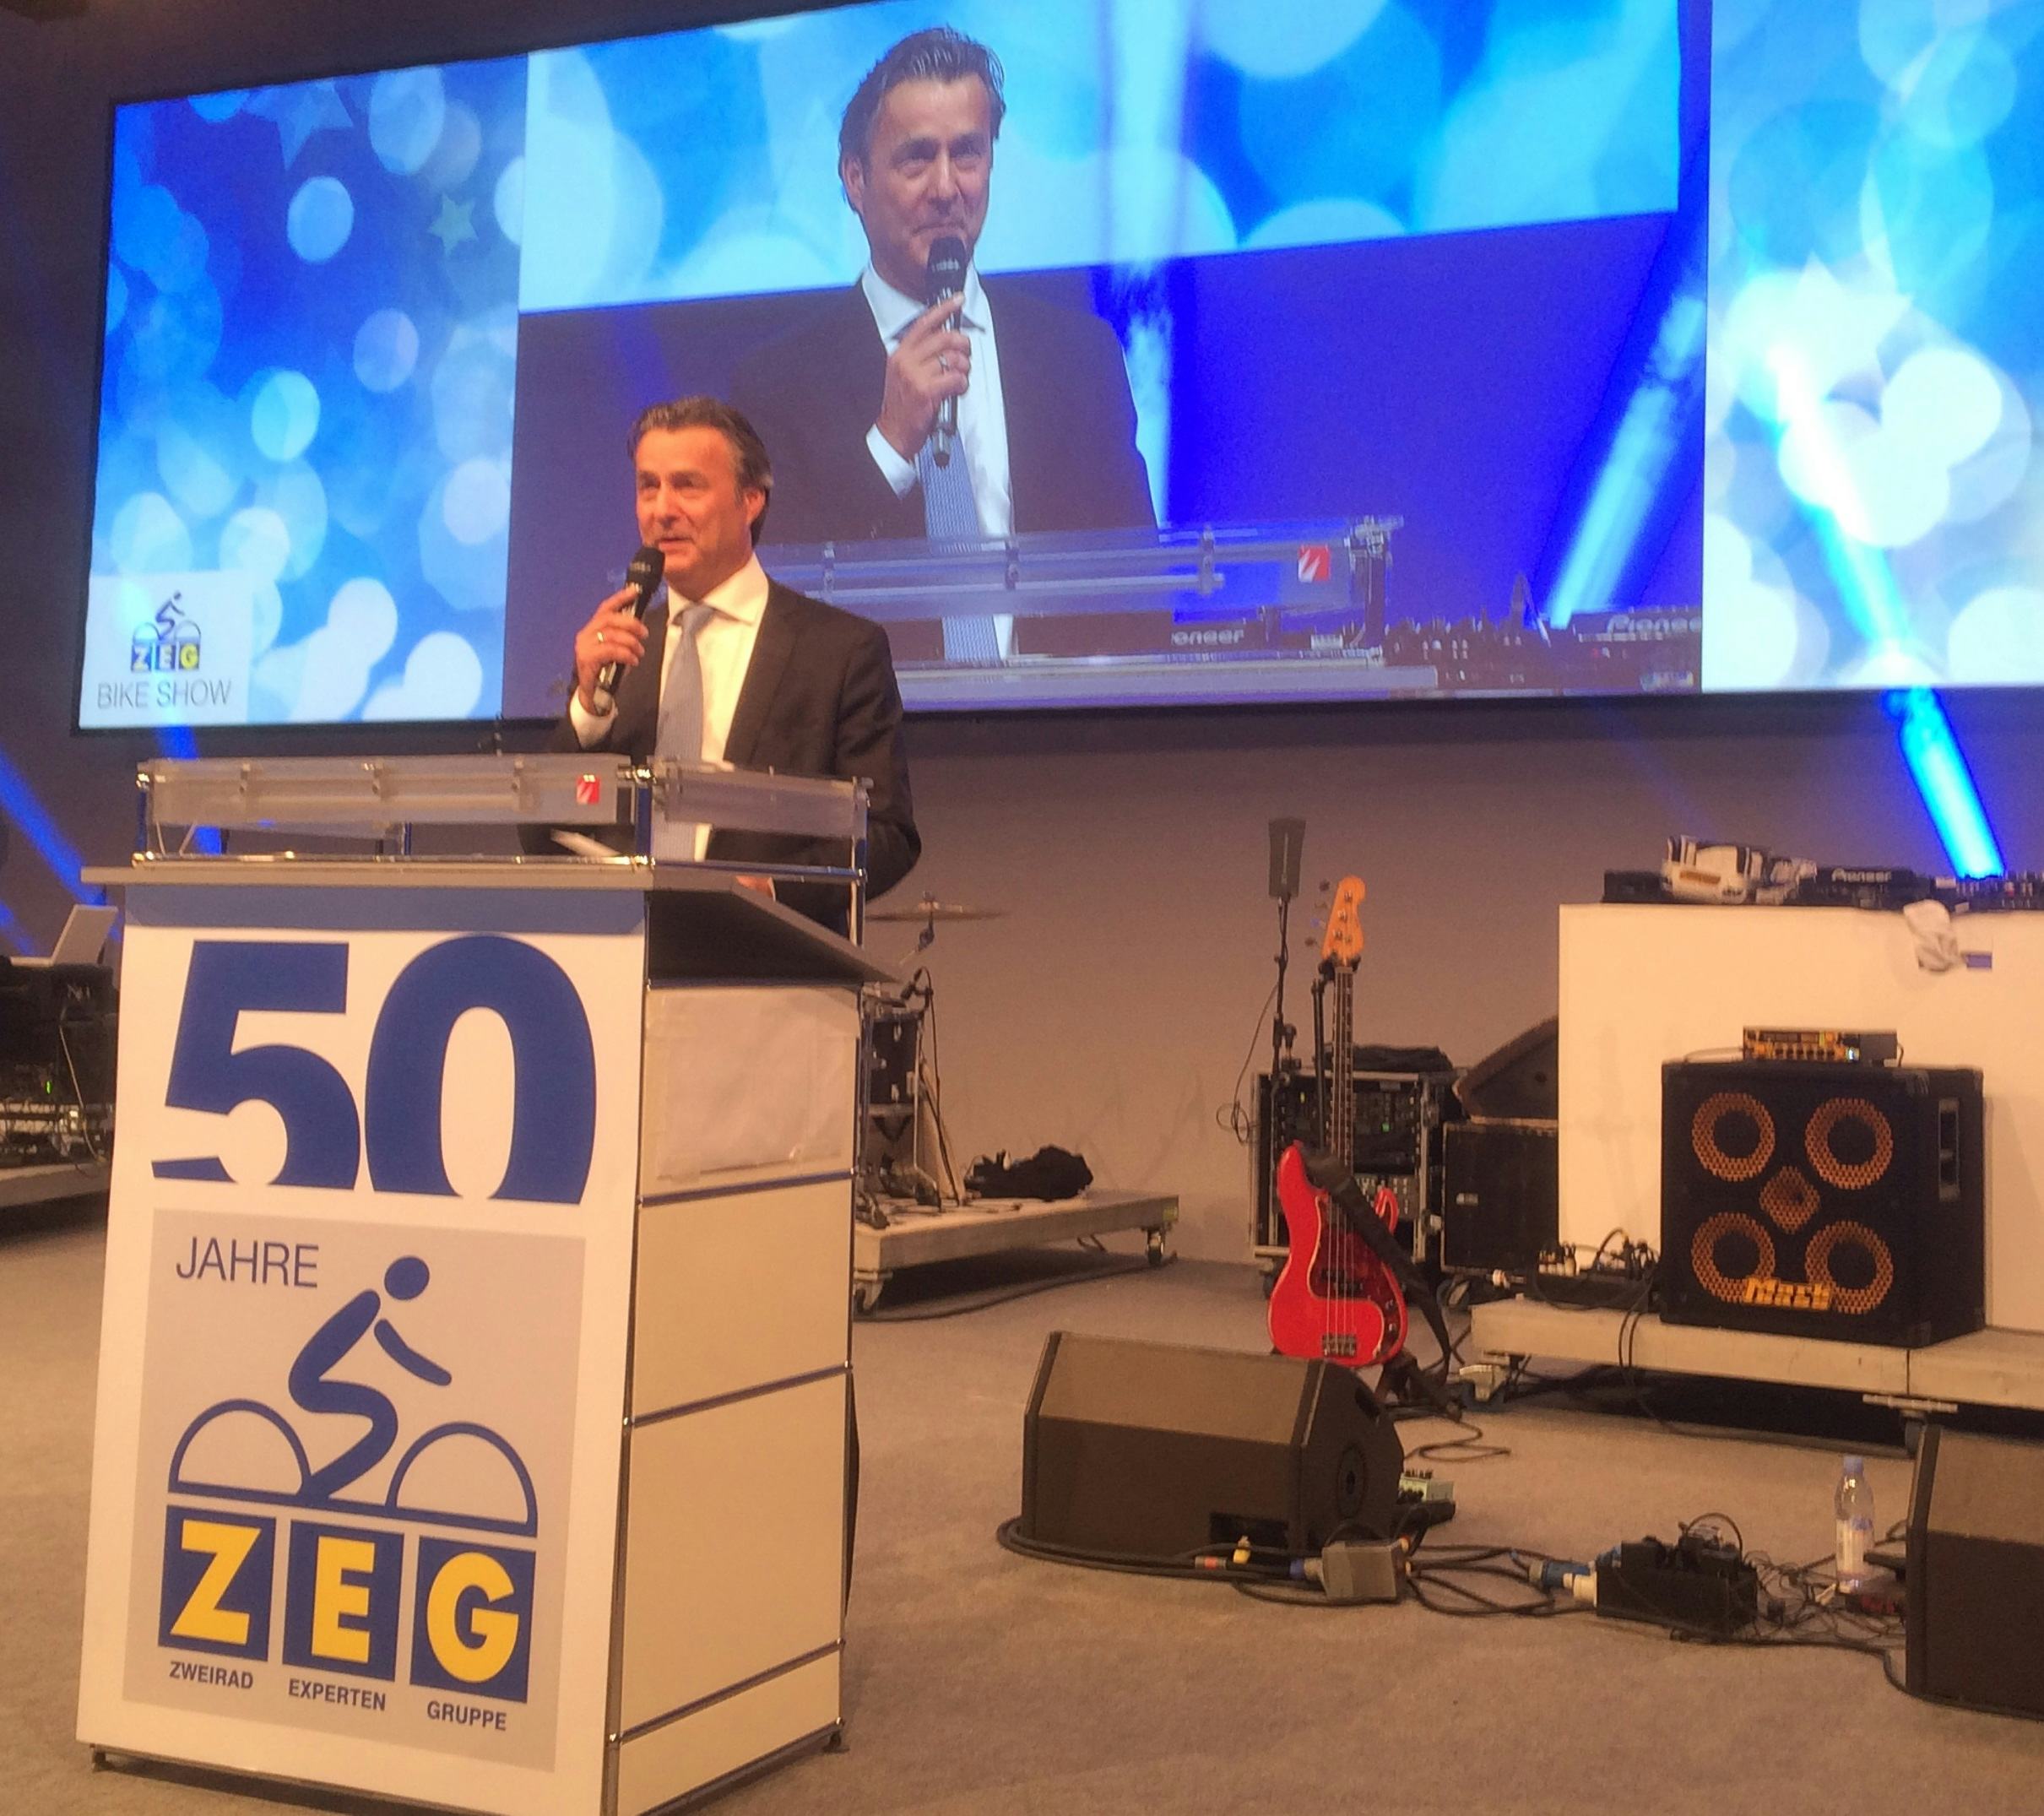 ZEG MD Georg Honkomp welcomes about 1,500 industry guests at the dinner party during the opening night of the dealer event. – Photo Bike Europe